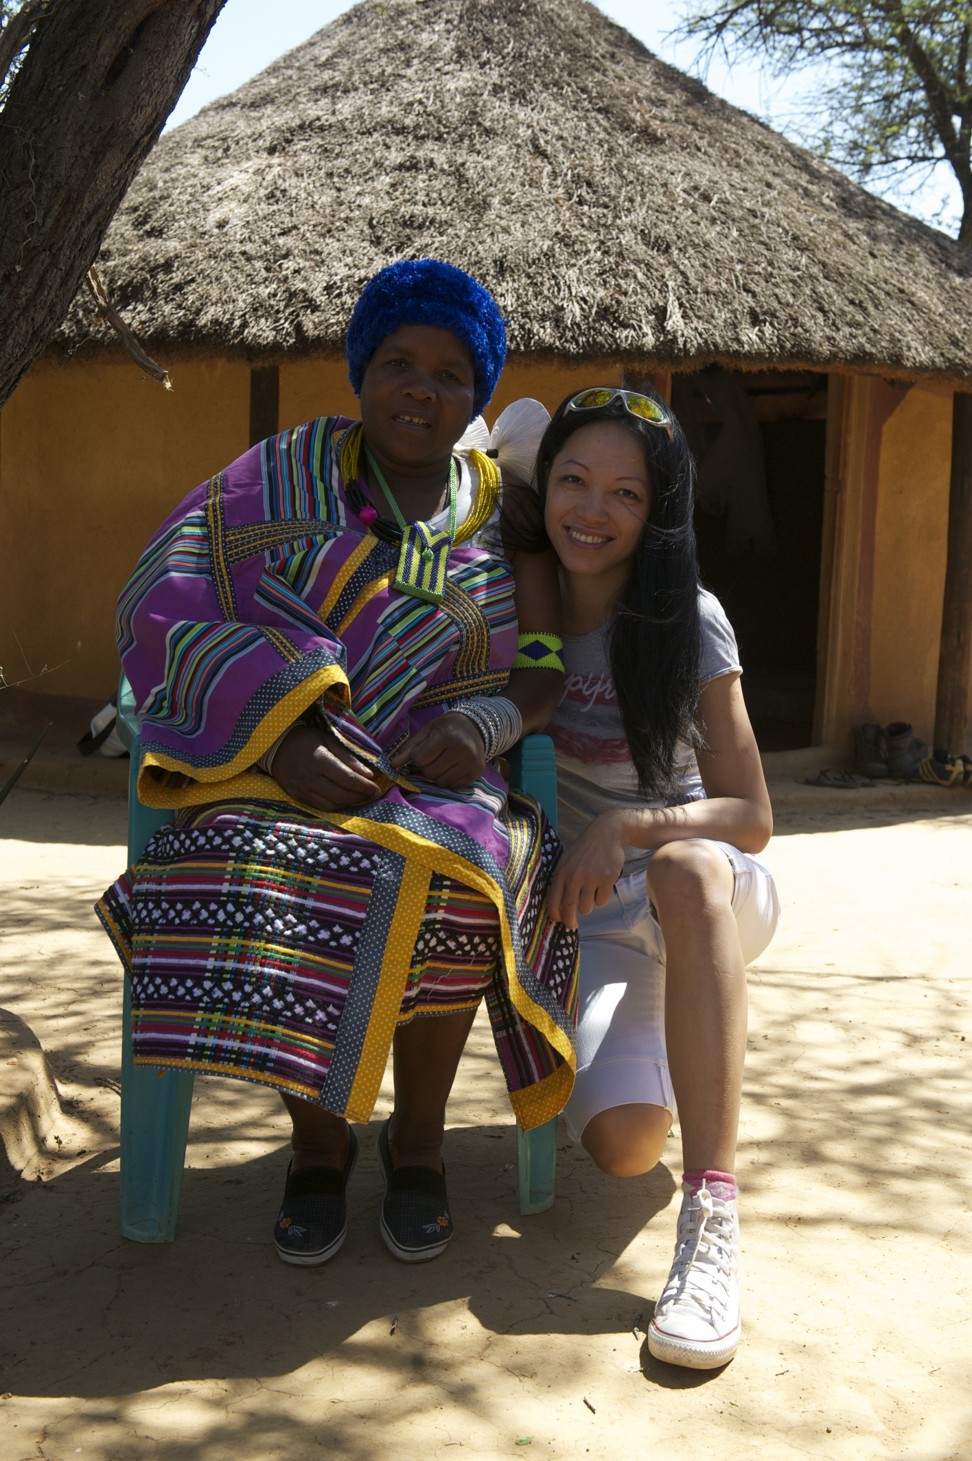 Hsueh visiting a tribe in Botswana in 2010. Photo: Courtesy of Shaolan Hsueh